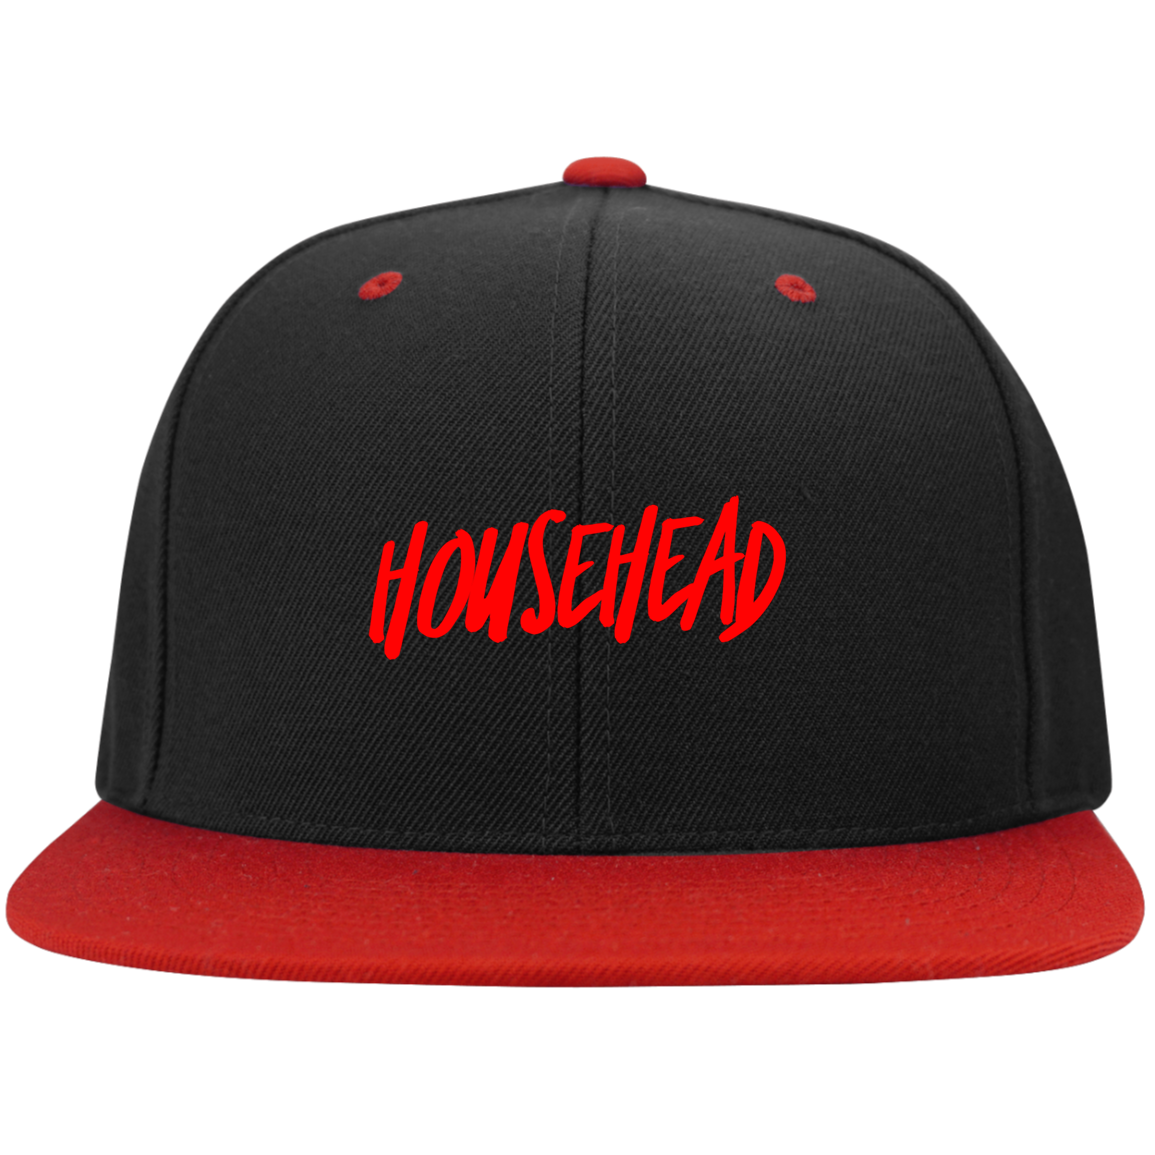 Househead Embroidered Hat for the House Music lover in you with FREE SHIPPING!